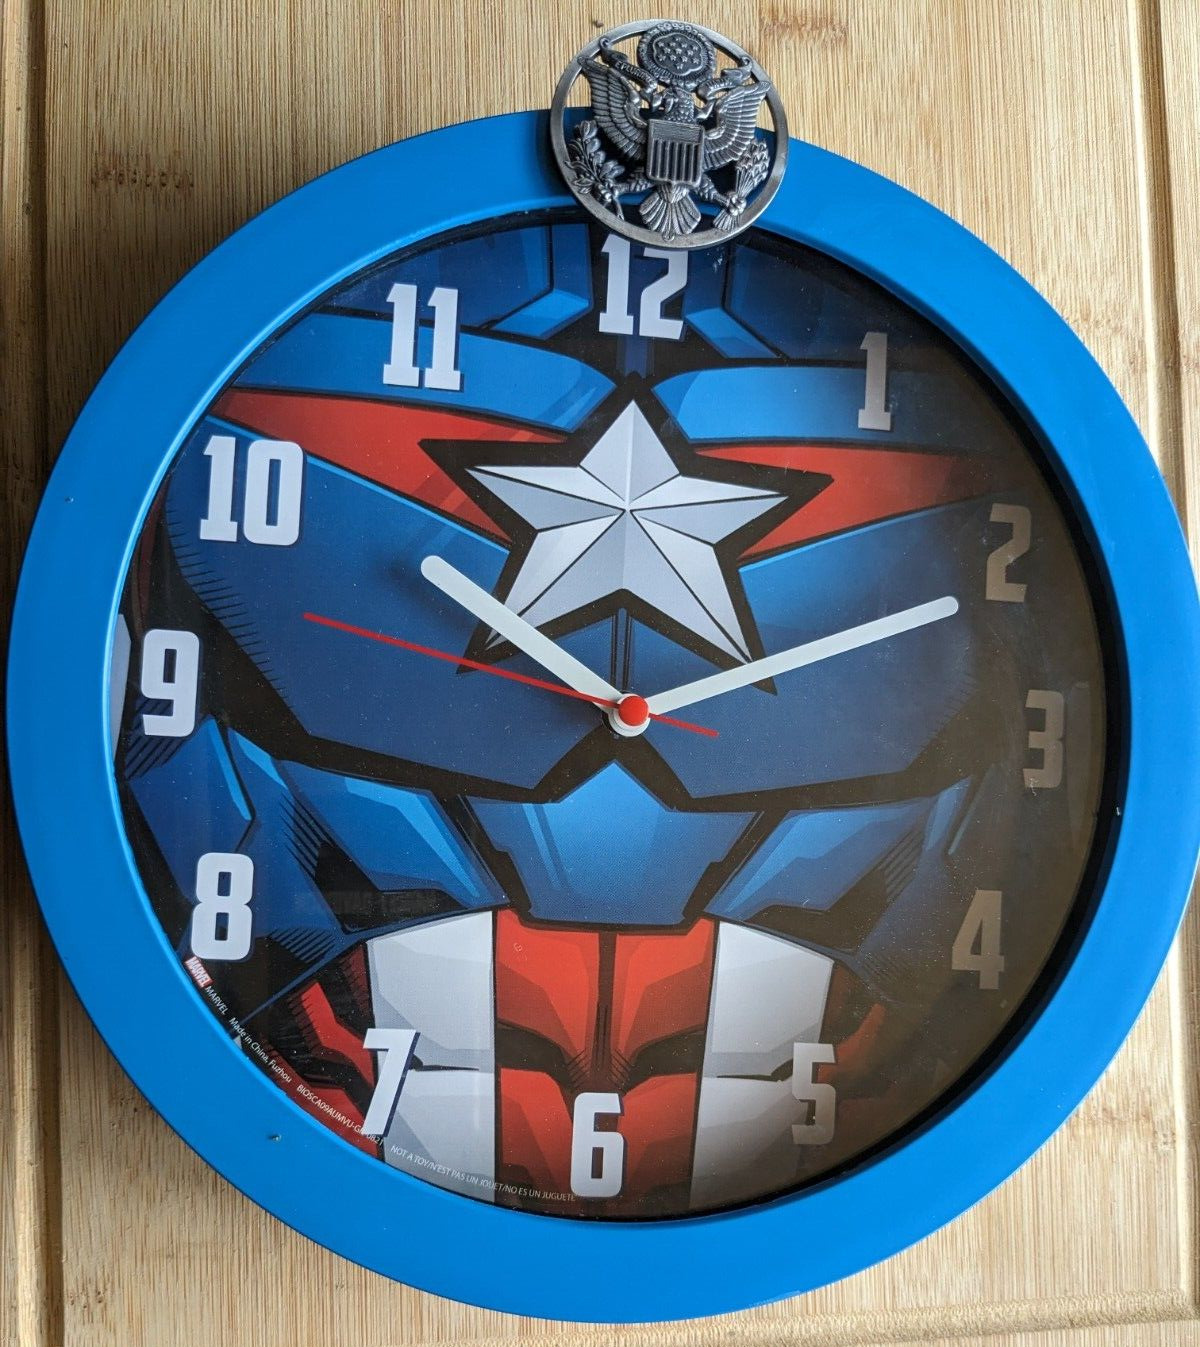 US AIR FORCE Metal Eagle CLOCK  with lighting bolts to tell time.  